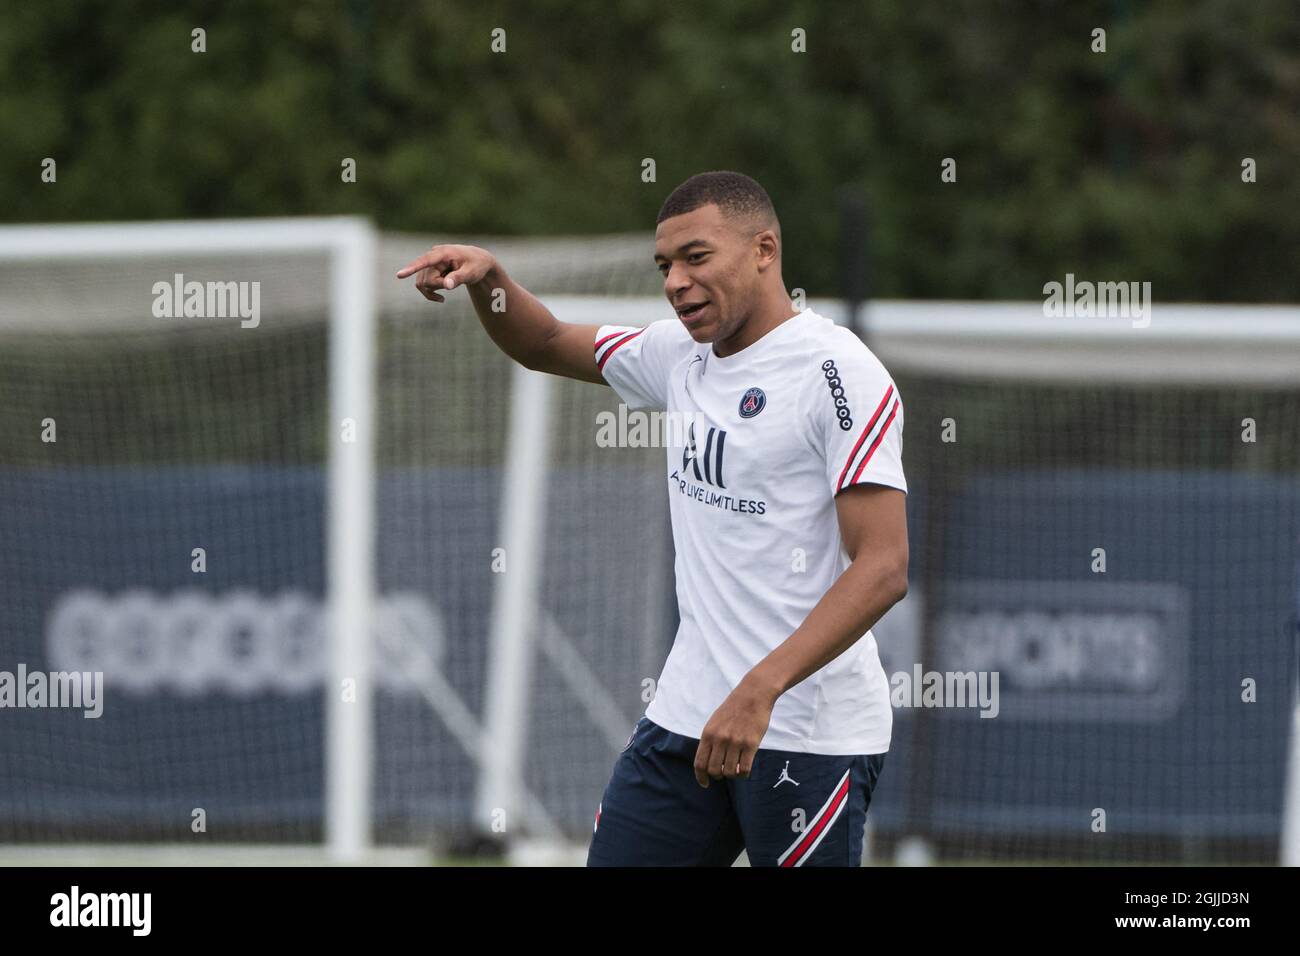 Saint Germain. France, September 10th, 2021. Kylian Mbappe of Paris Saint  Germain during a training session of the football club at the Ooredoo  center (Camps des Loges) at Saint Germain. Saint Germain